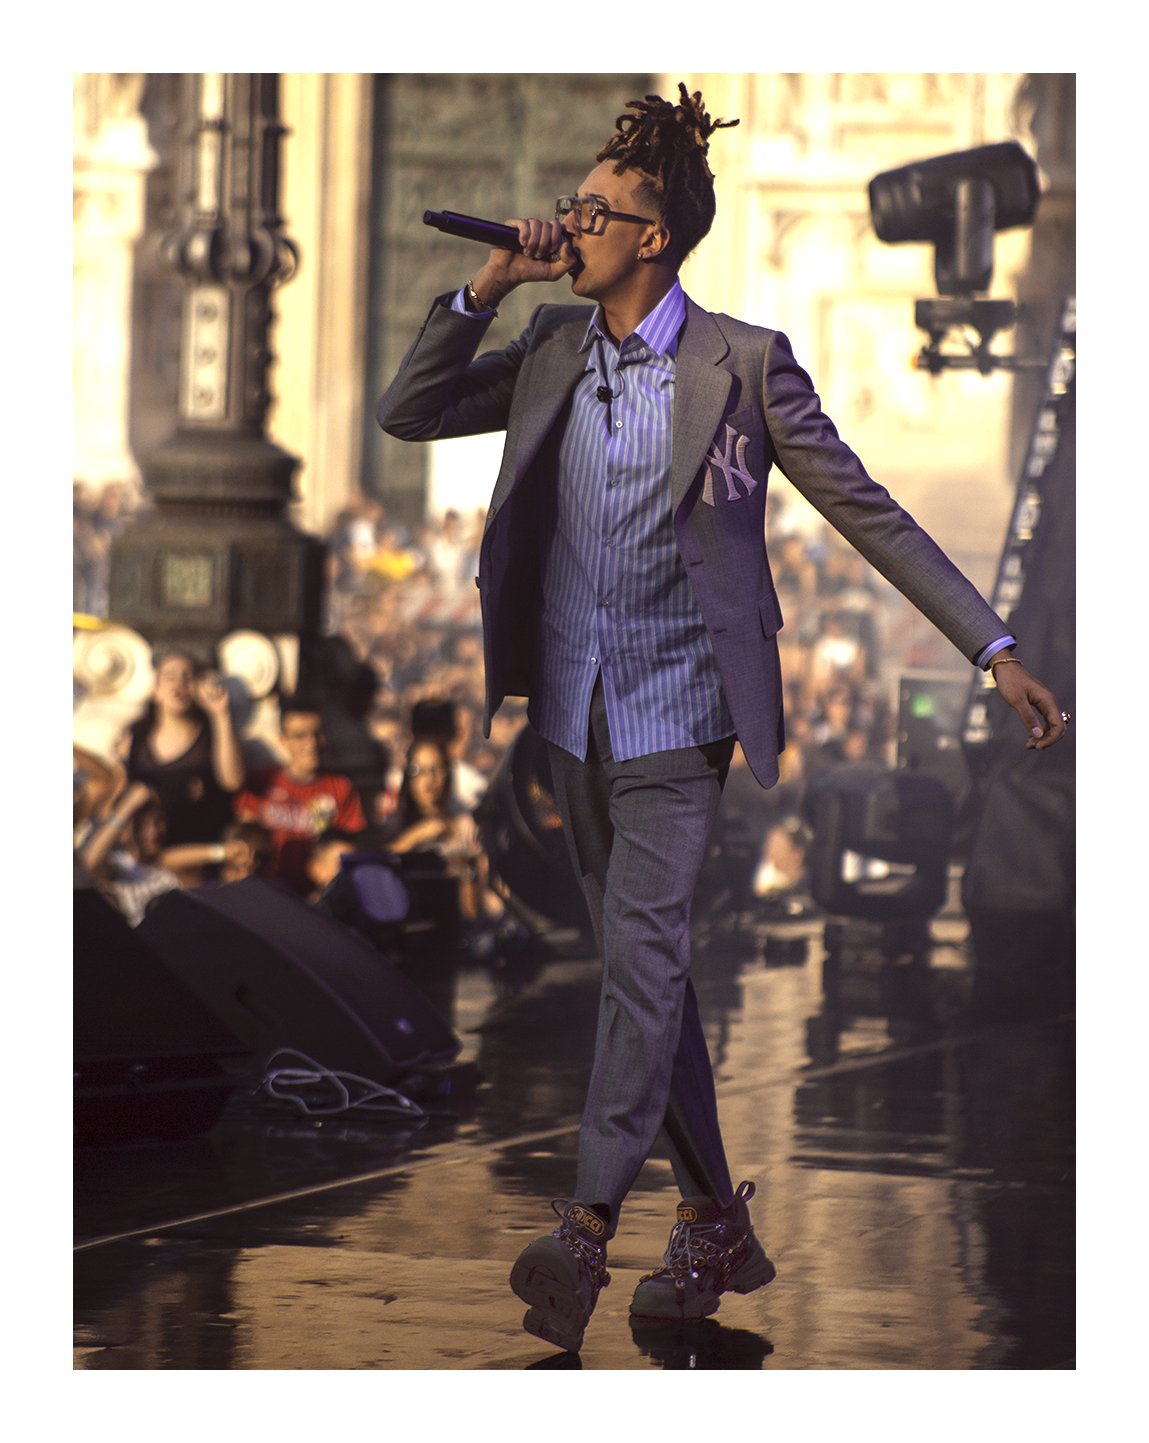 gucci on X: On stage at a live concert in Milan, Tunisian-Italian